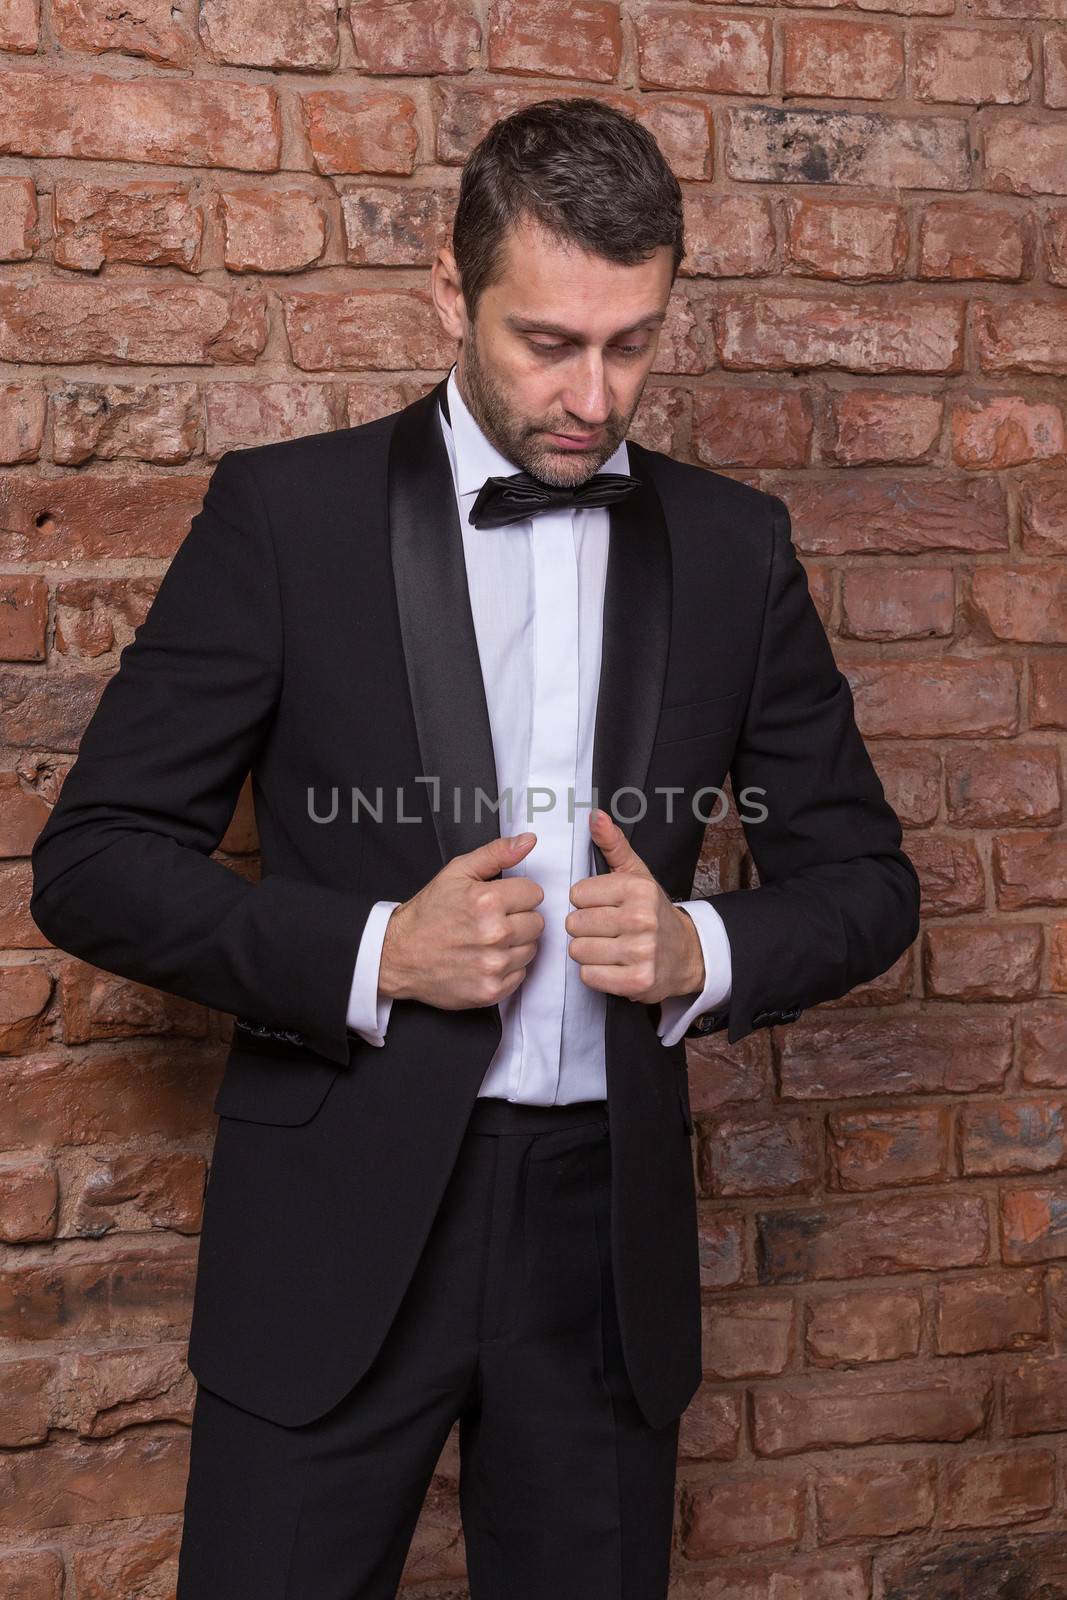 Elegant handsome macho man in a bow tie and tuxedo leaning against a brick wall giving the camera a sultry look